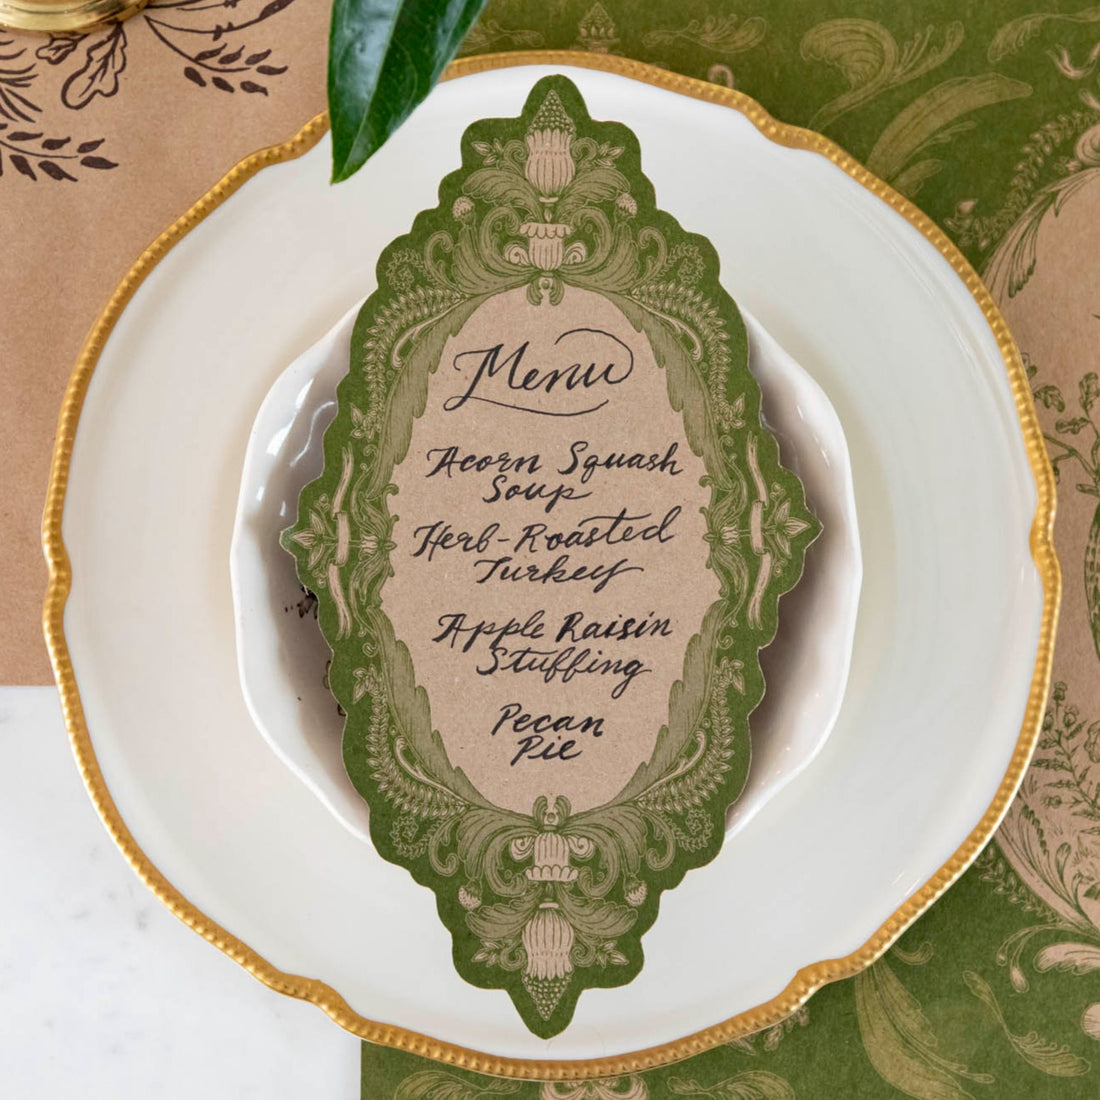 A Moss Fable Toile Table Card with a menu written on it in beautiful script resting on the plate of a rustic place setting.